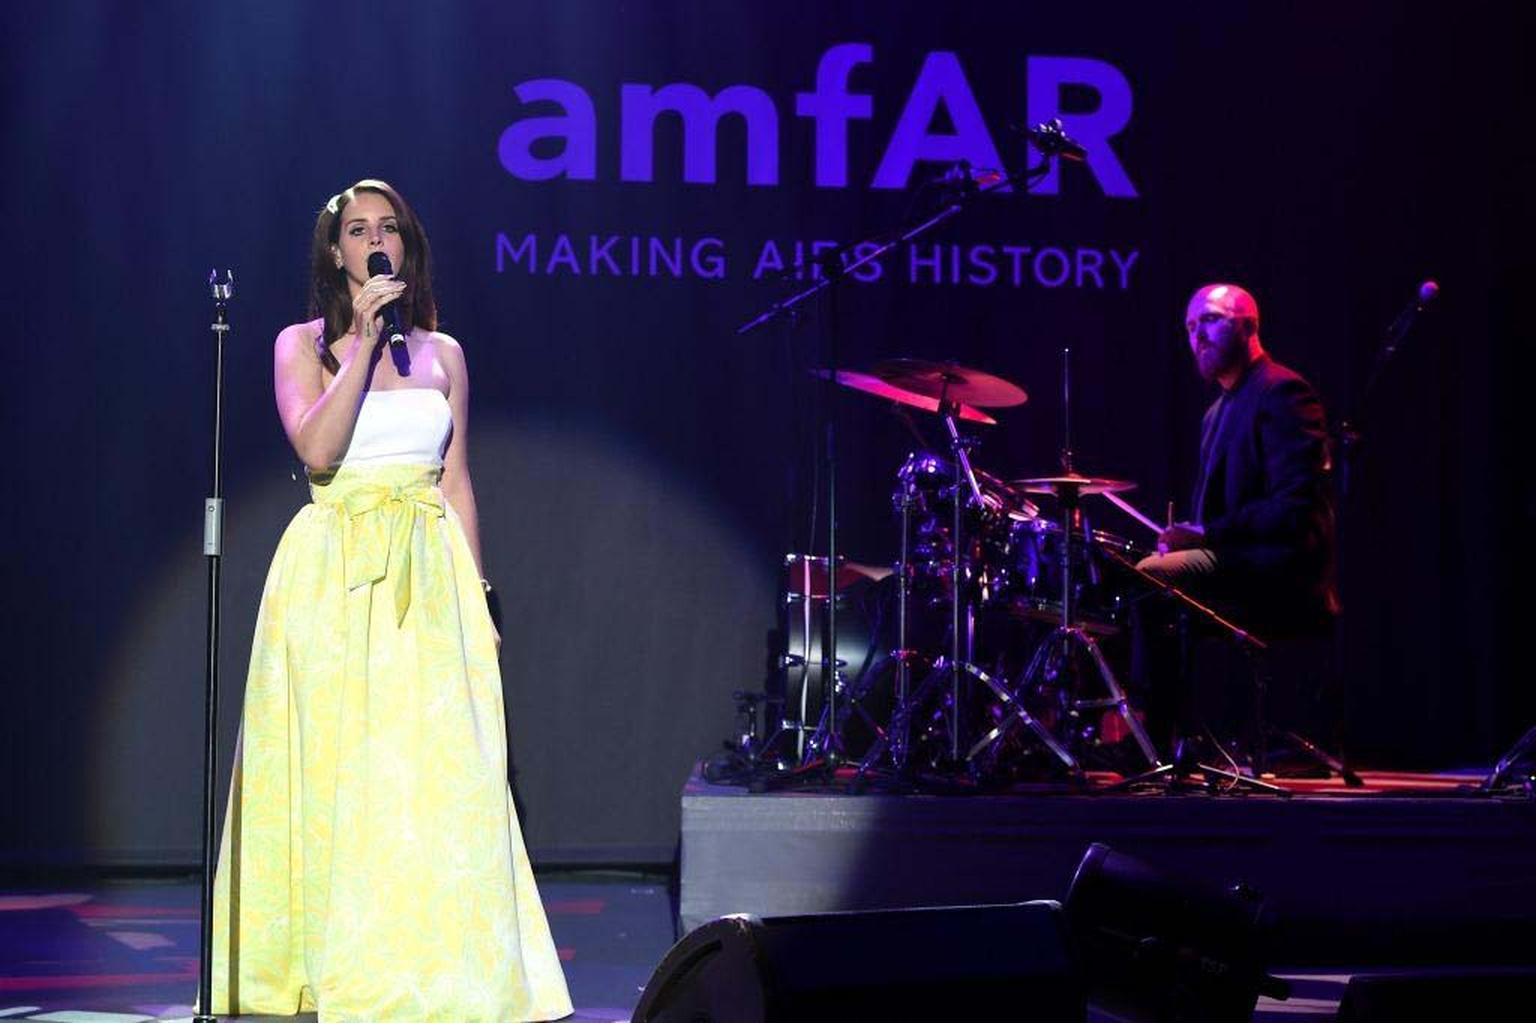 Lana del Rey performed during the amfAR Charity Gala in Cannes, which raised $38 million to fund HIV/AIDS research